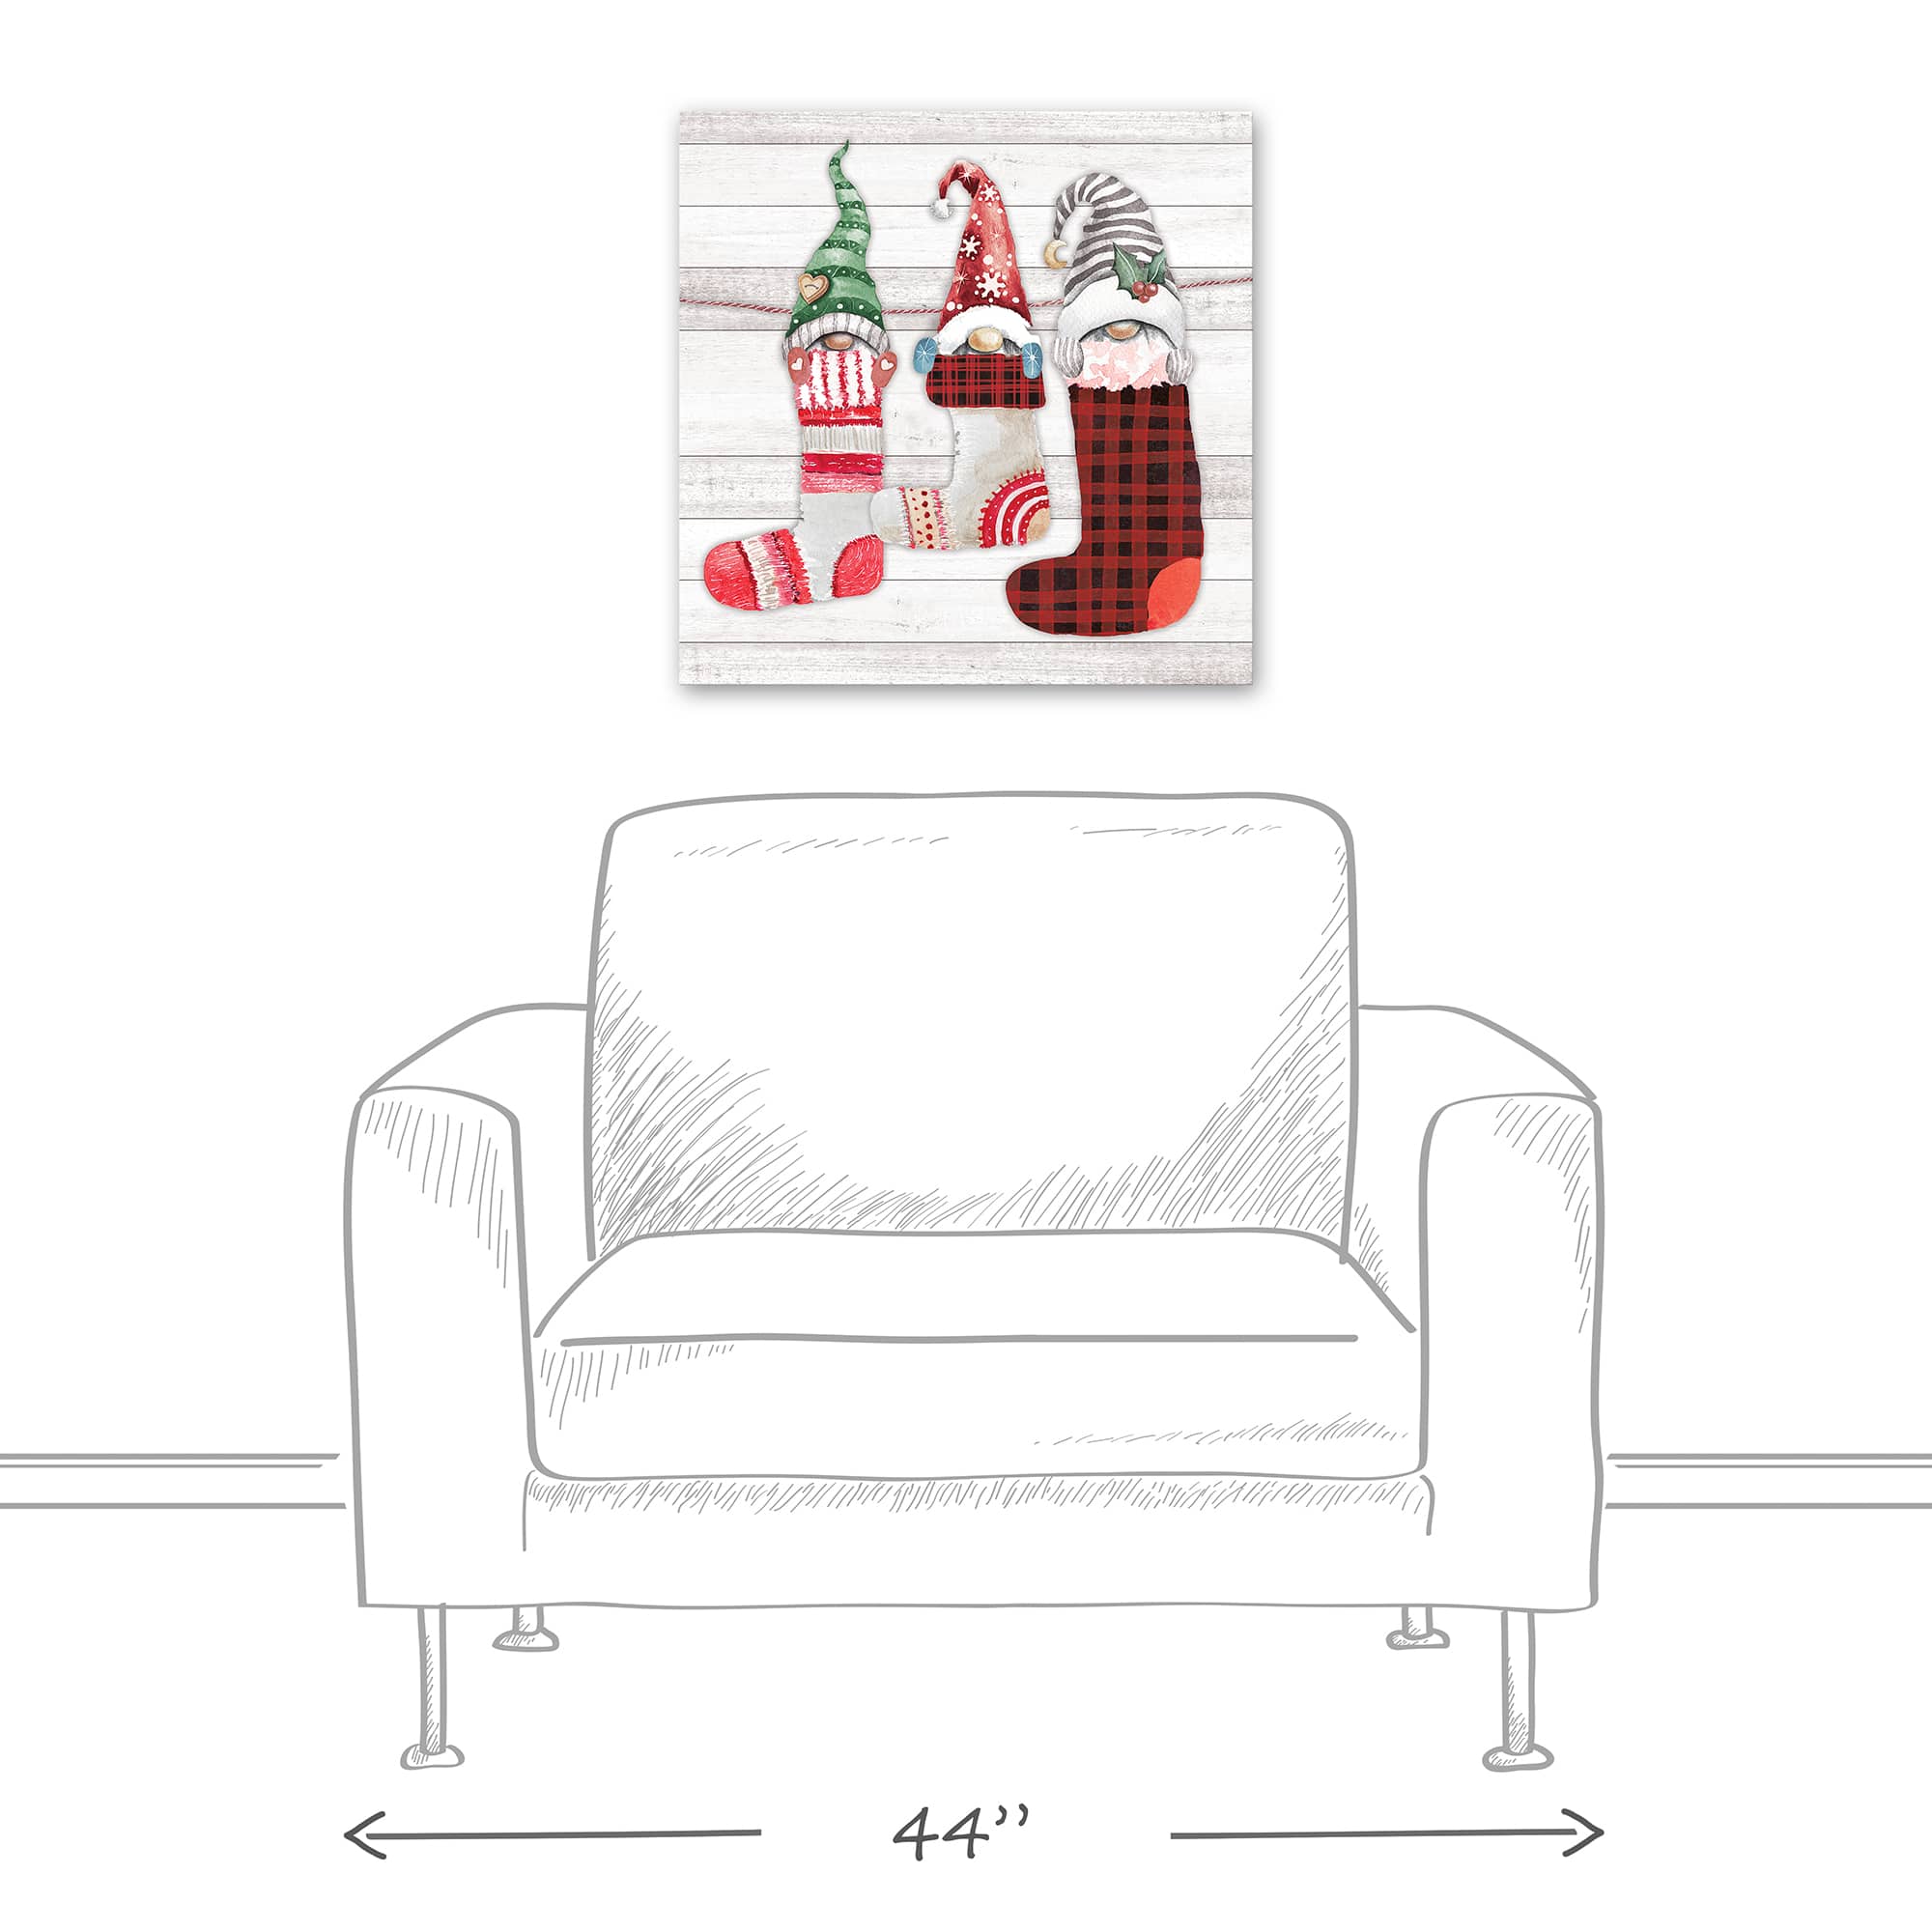 Gnome Stockings 20x20 Canvas Wall Art